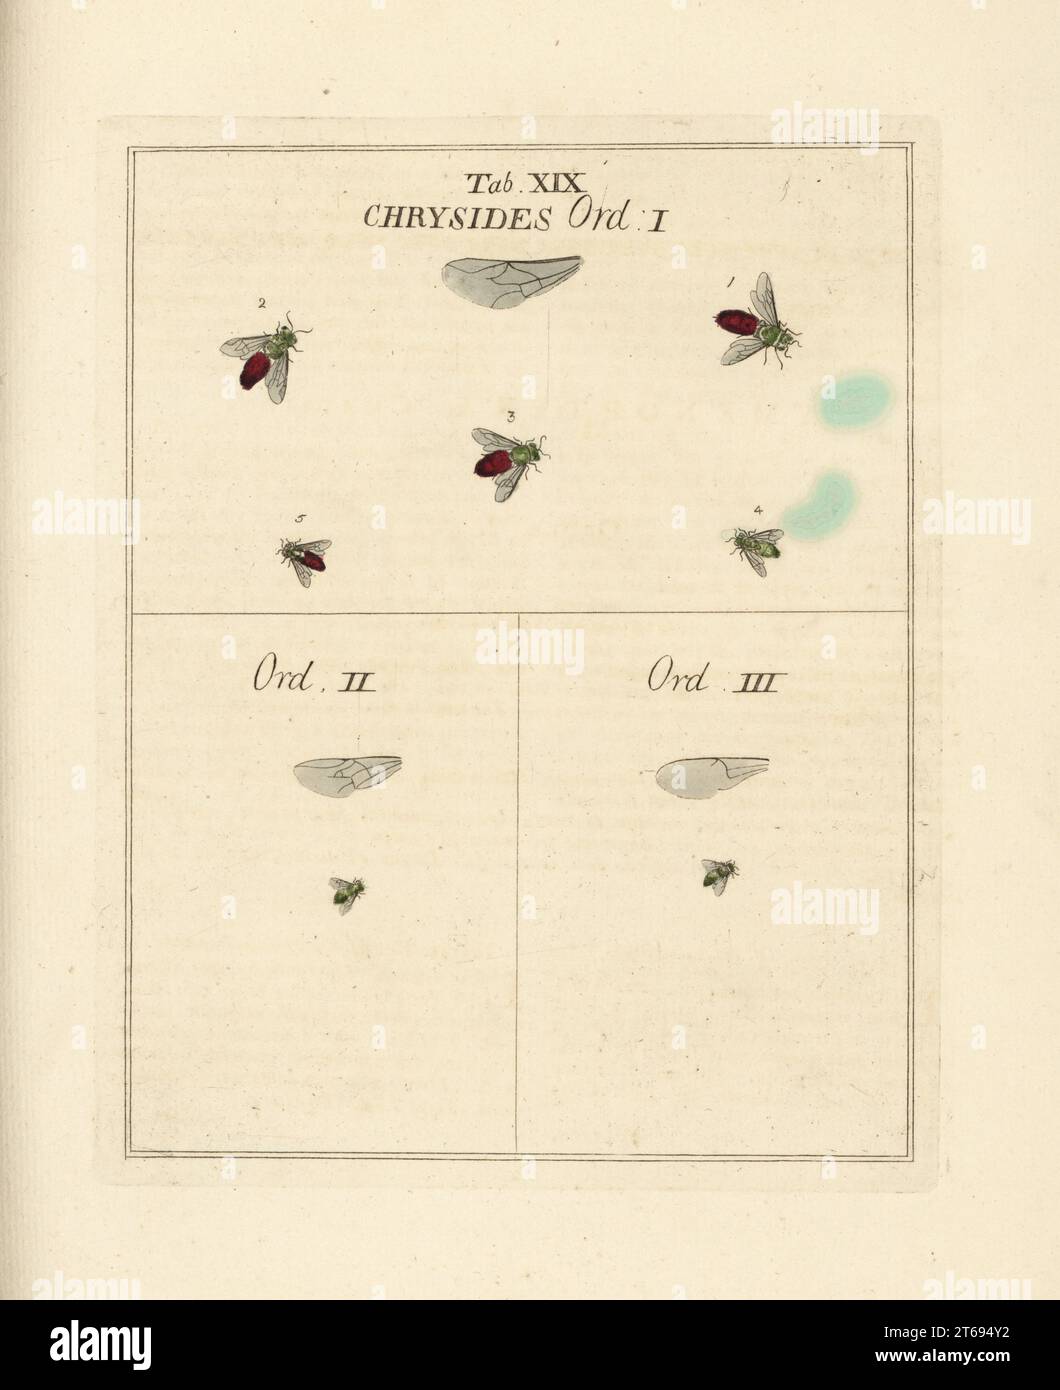 Cuckoo wasp, Sphex ignita 1, shimmering ruby tail, Chrysis fulgida 2, Chrysura radians 3, C. veridans 4, C. hephaestites 5, Order I. Chrysis curax, Order II, Chrysis politus, Order III. Hymenoptera. Chryside. Handcoloured copperplate engraving drawn and engraved by Moses Harris from his own Exposition of English Insects, Including the several Classes of Neuroptera, Hymenoptera, Diptera, or Bees, Flies and Libellulae, White and Robson, London, 1782. Stock Photo